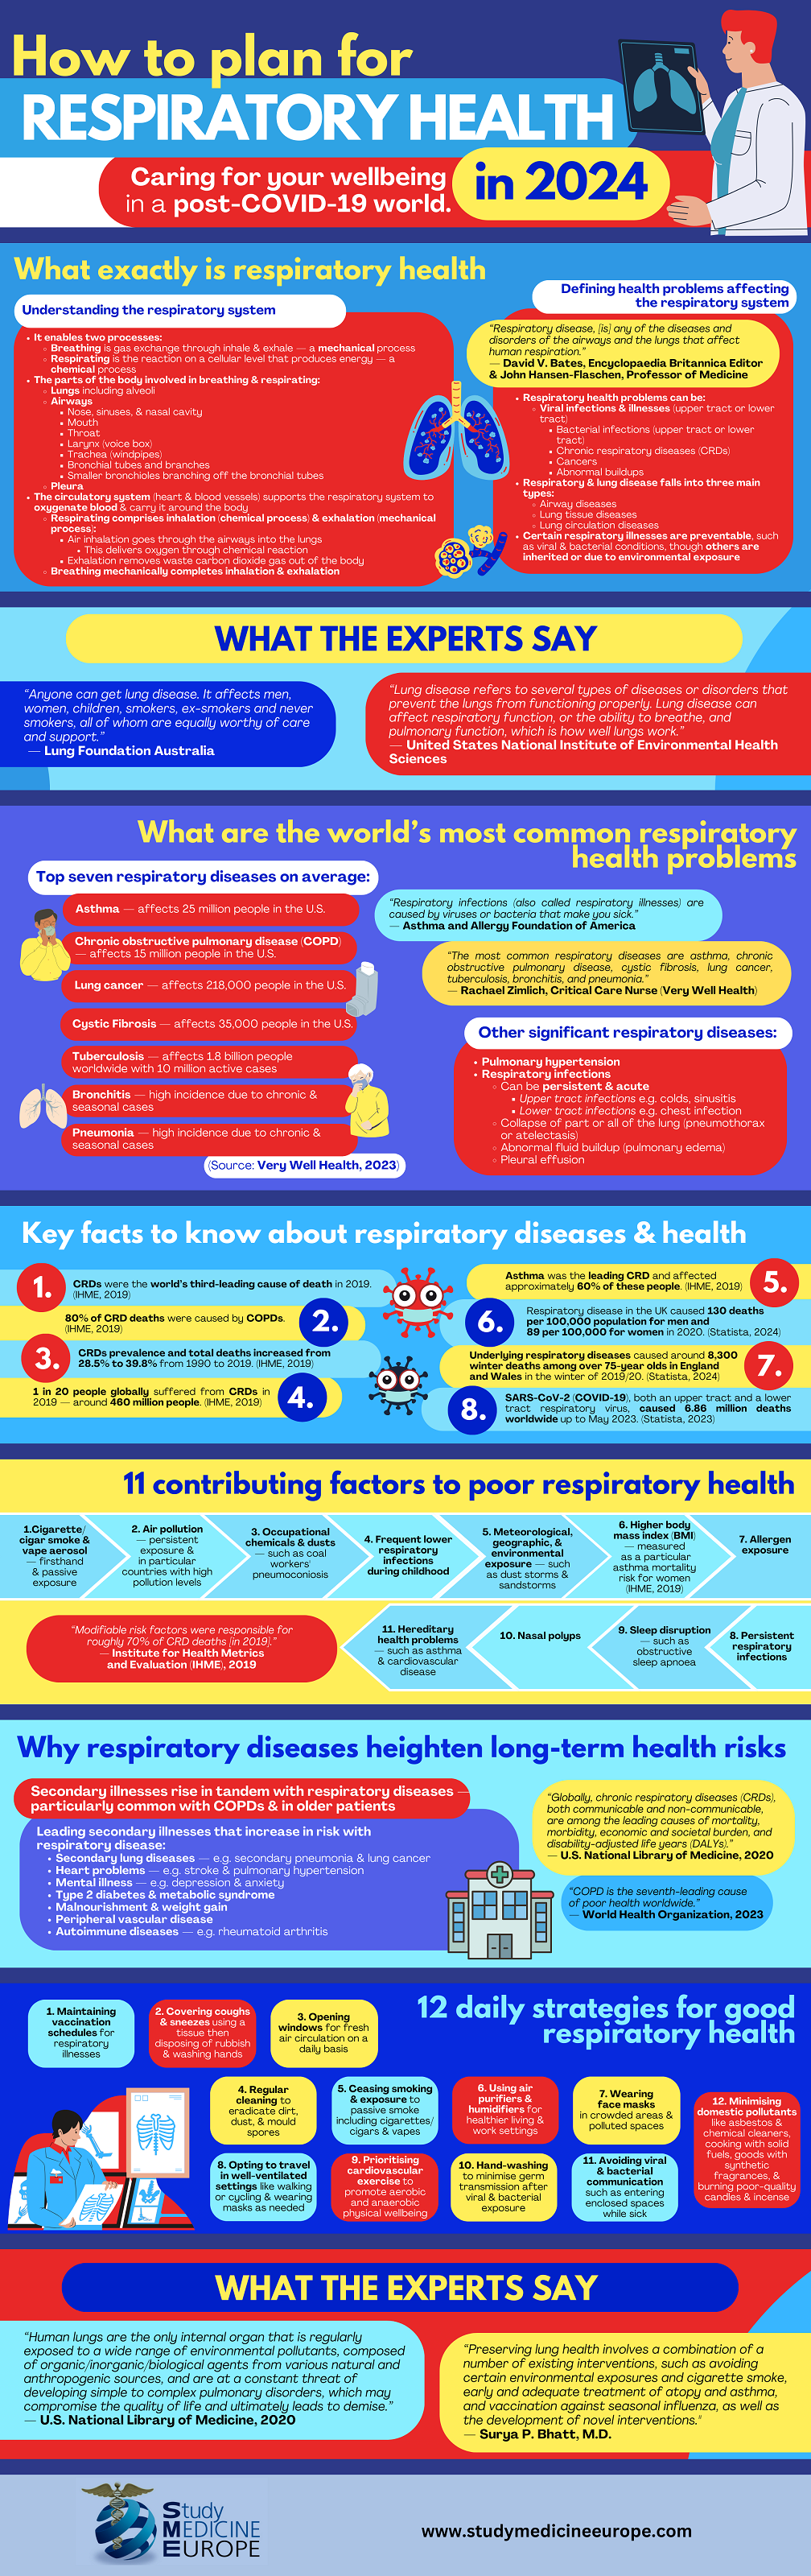 How To Plan For Respiratory Health In 2024 [Infographic]